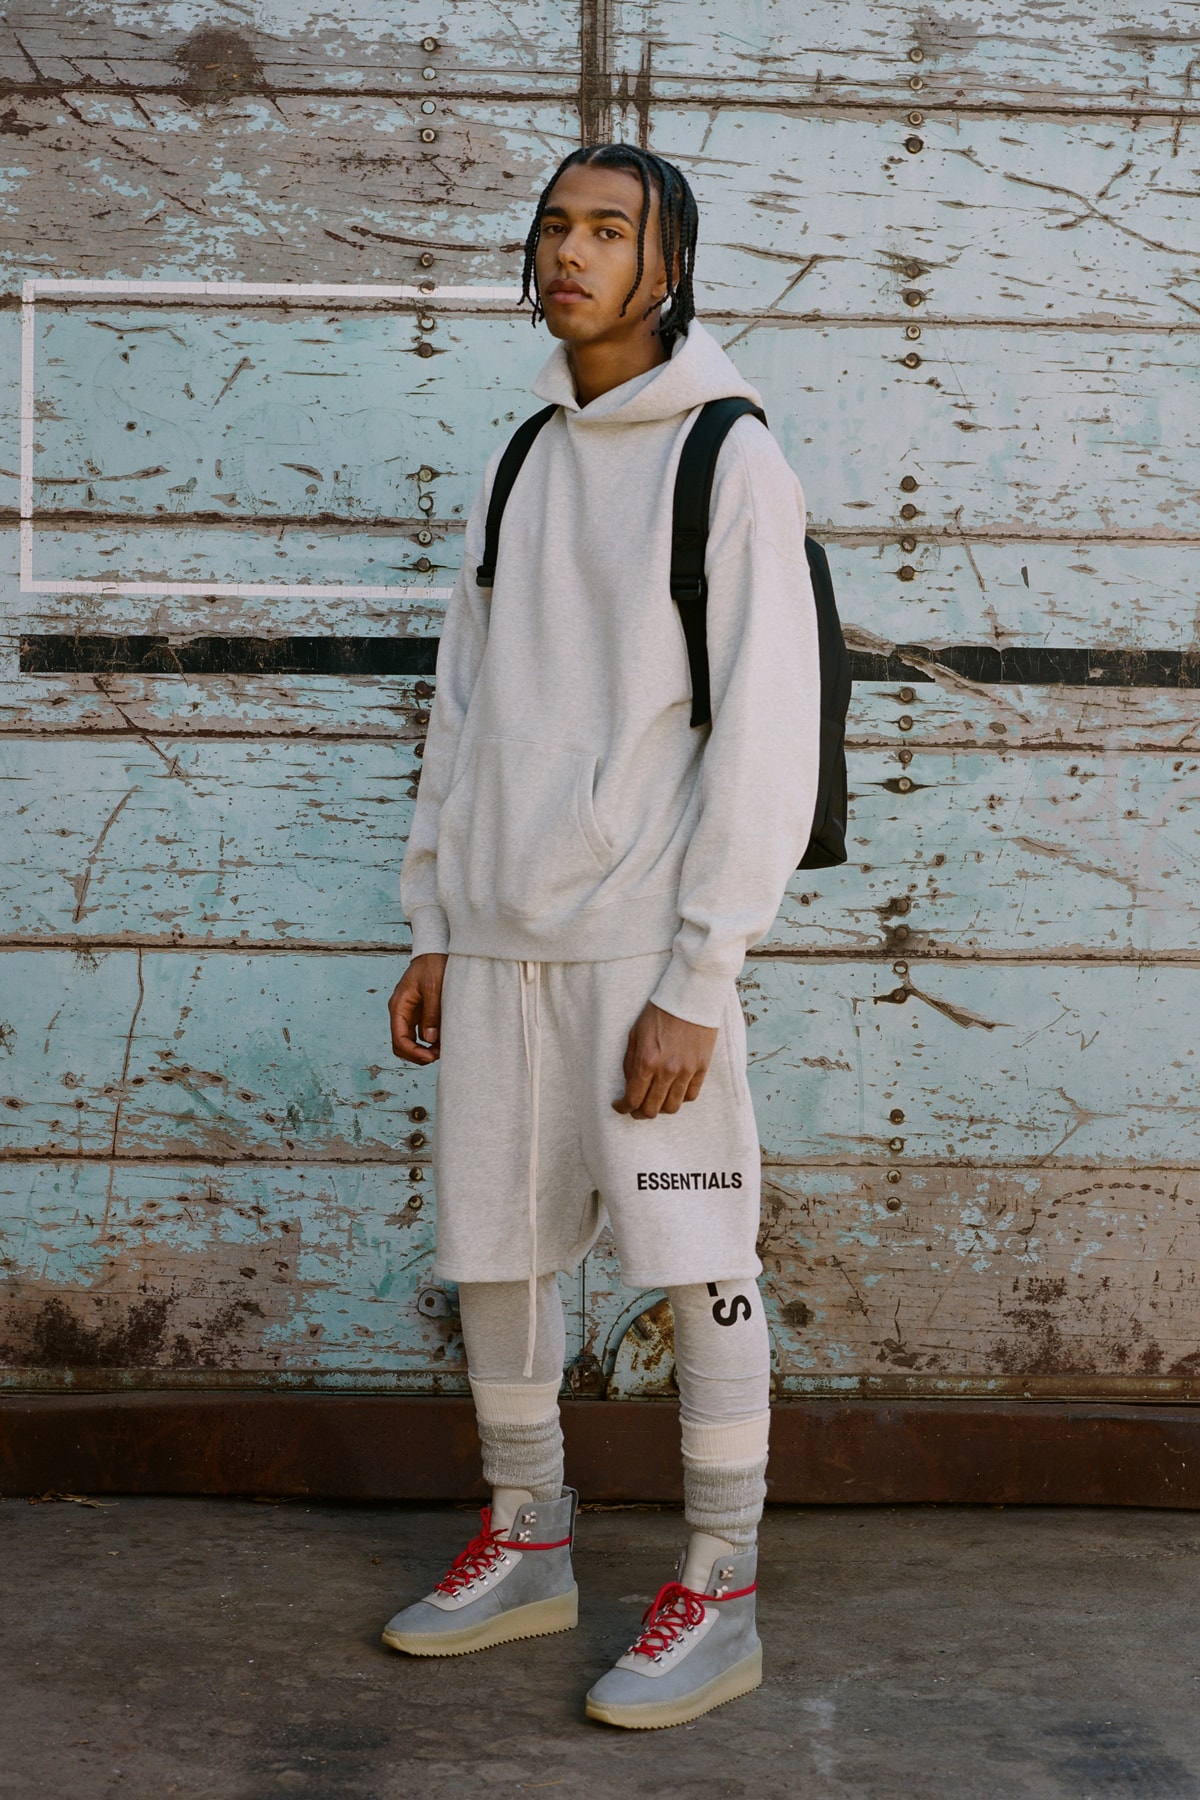 Fear of God Essentials Collection Lookbook